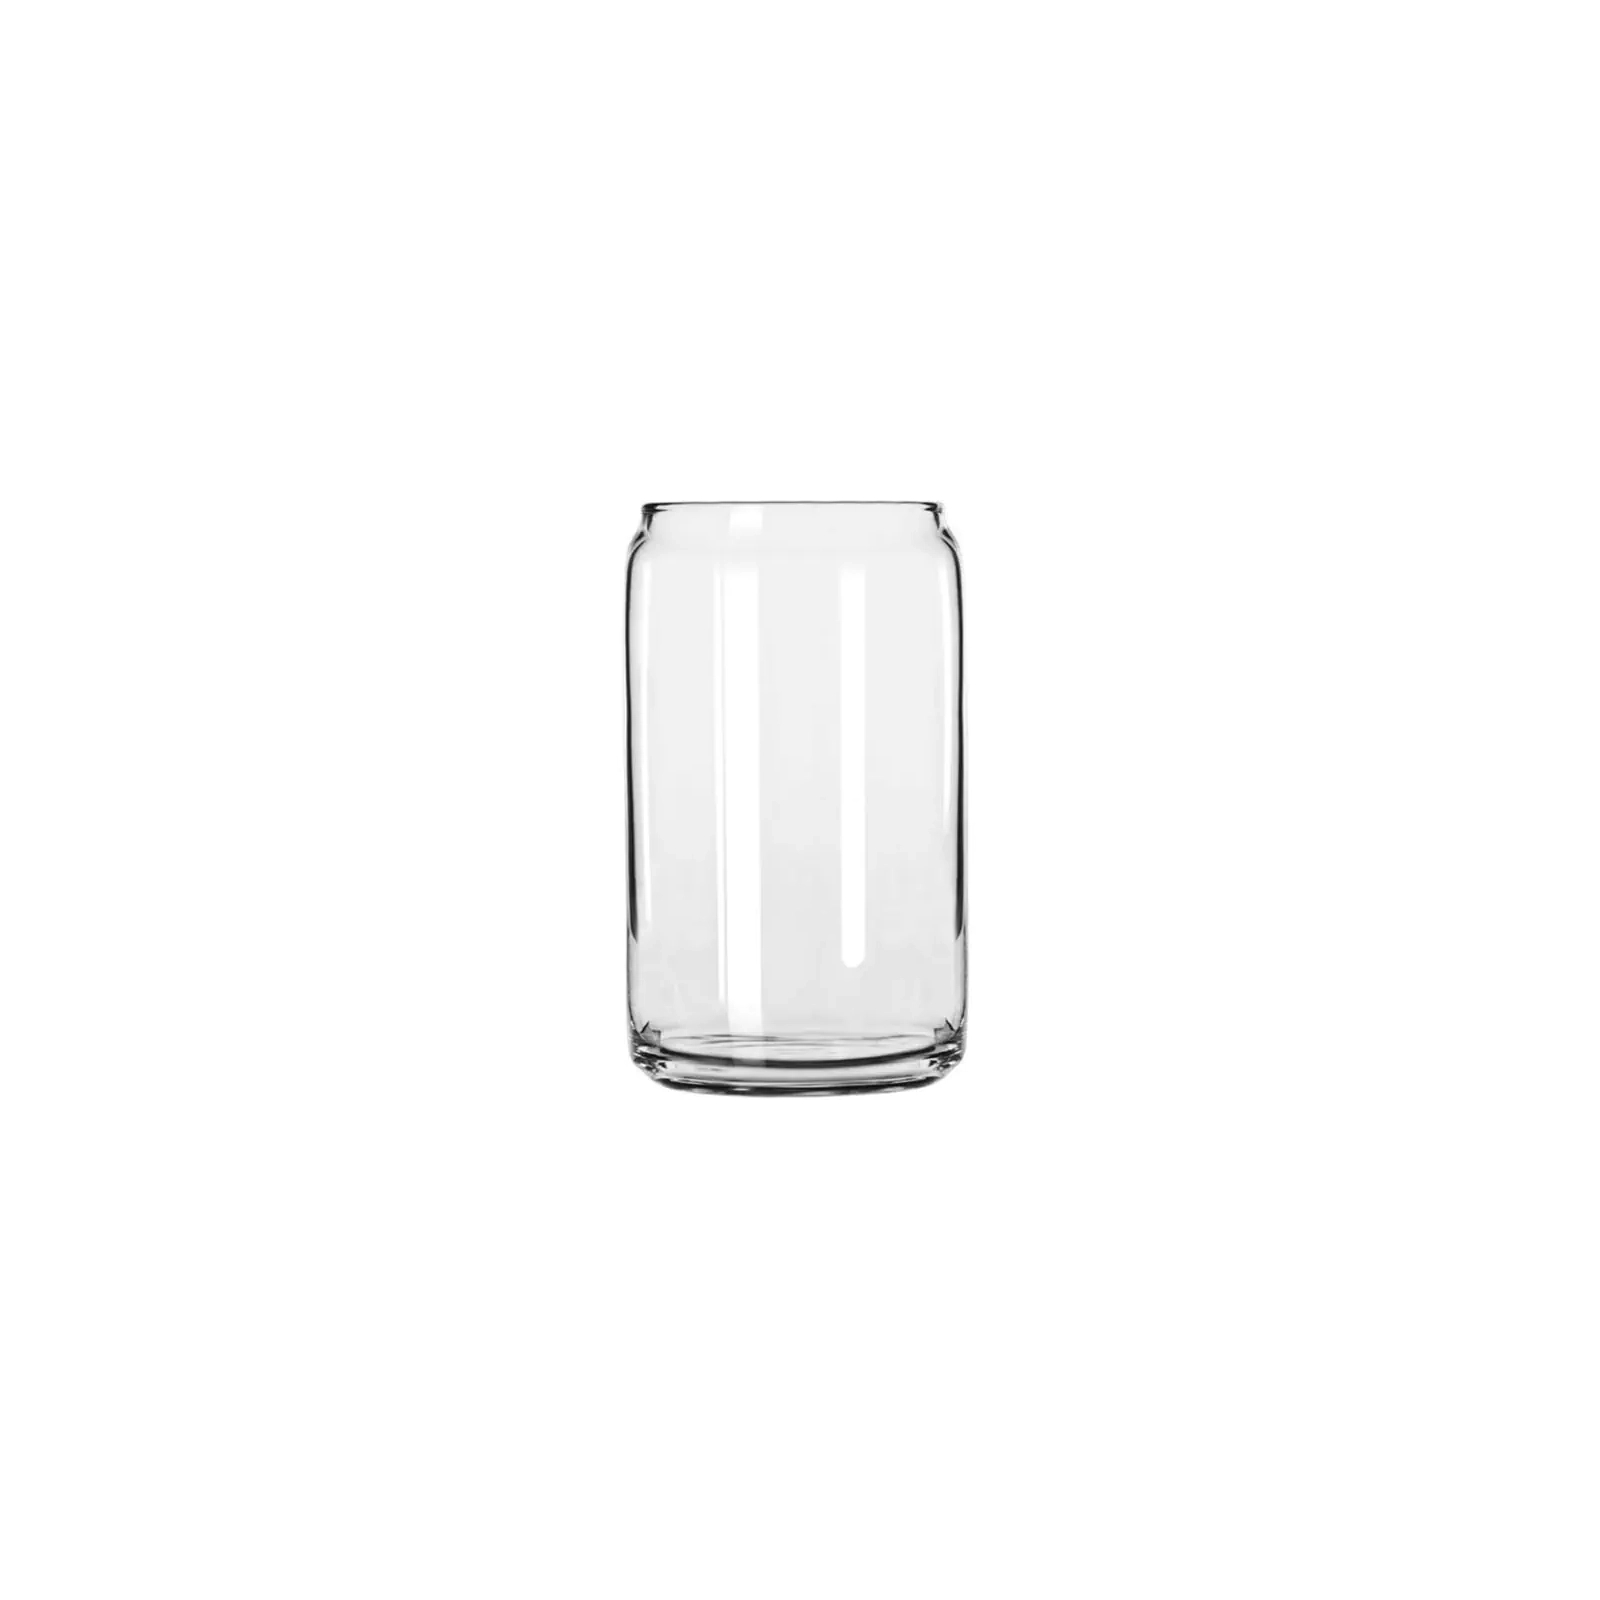 Склянка Onis (Libbey) Beers Glass Can 473 мл (824735ВП)